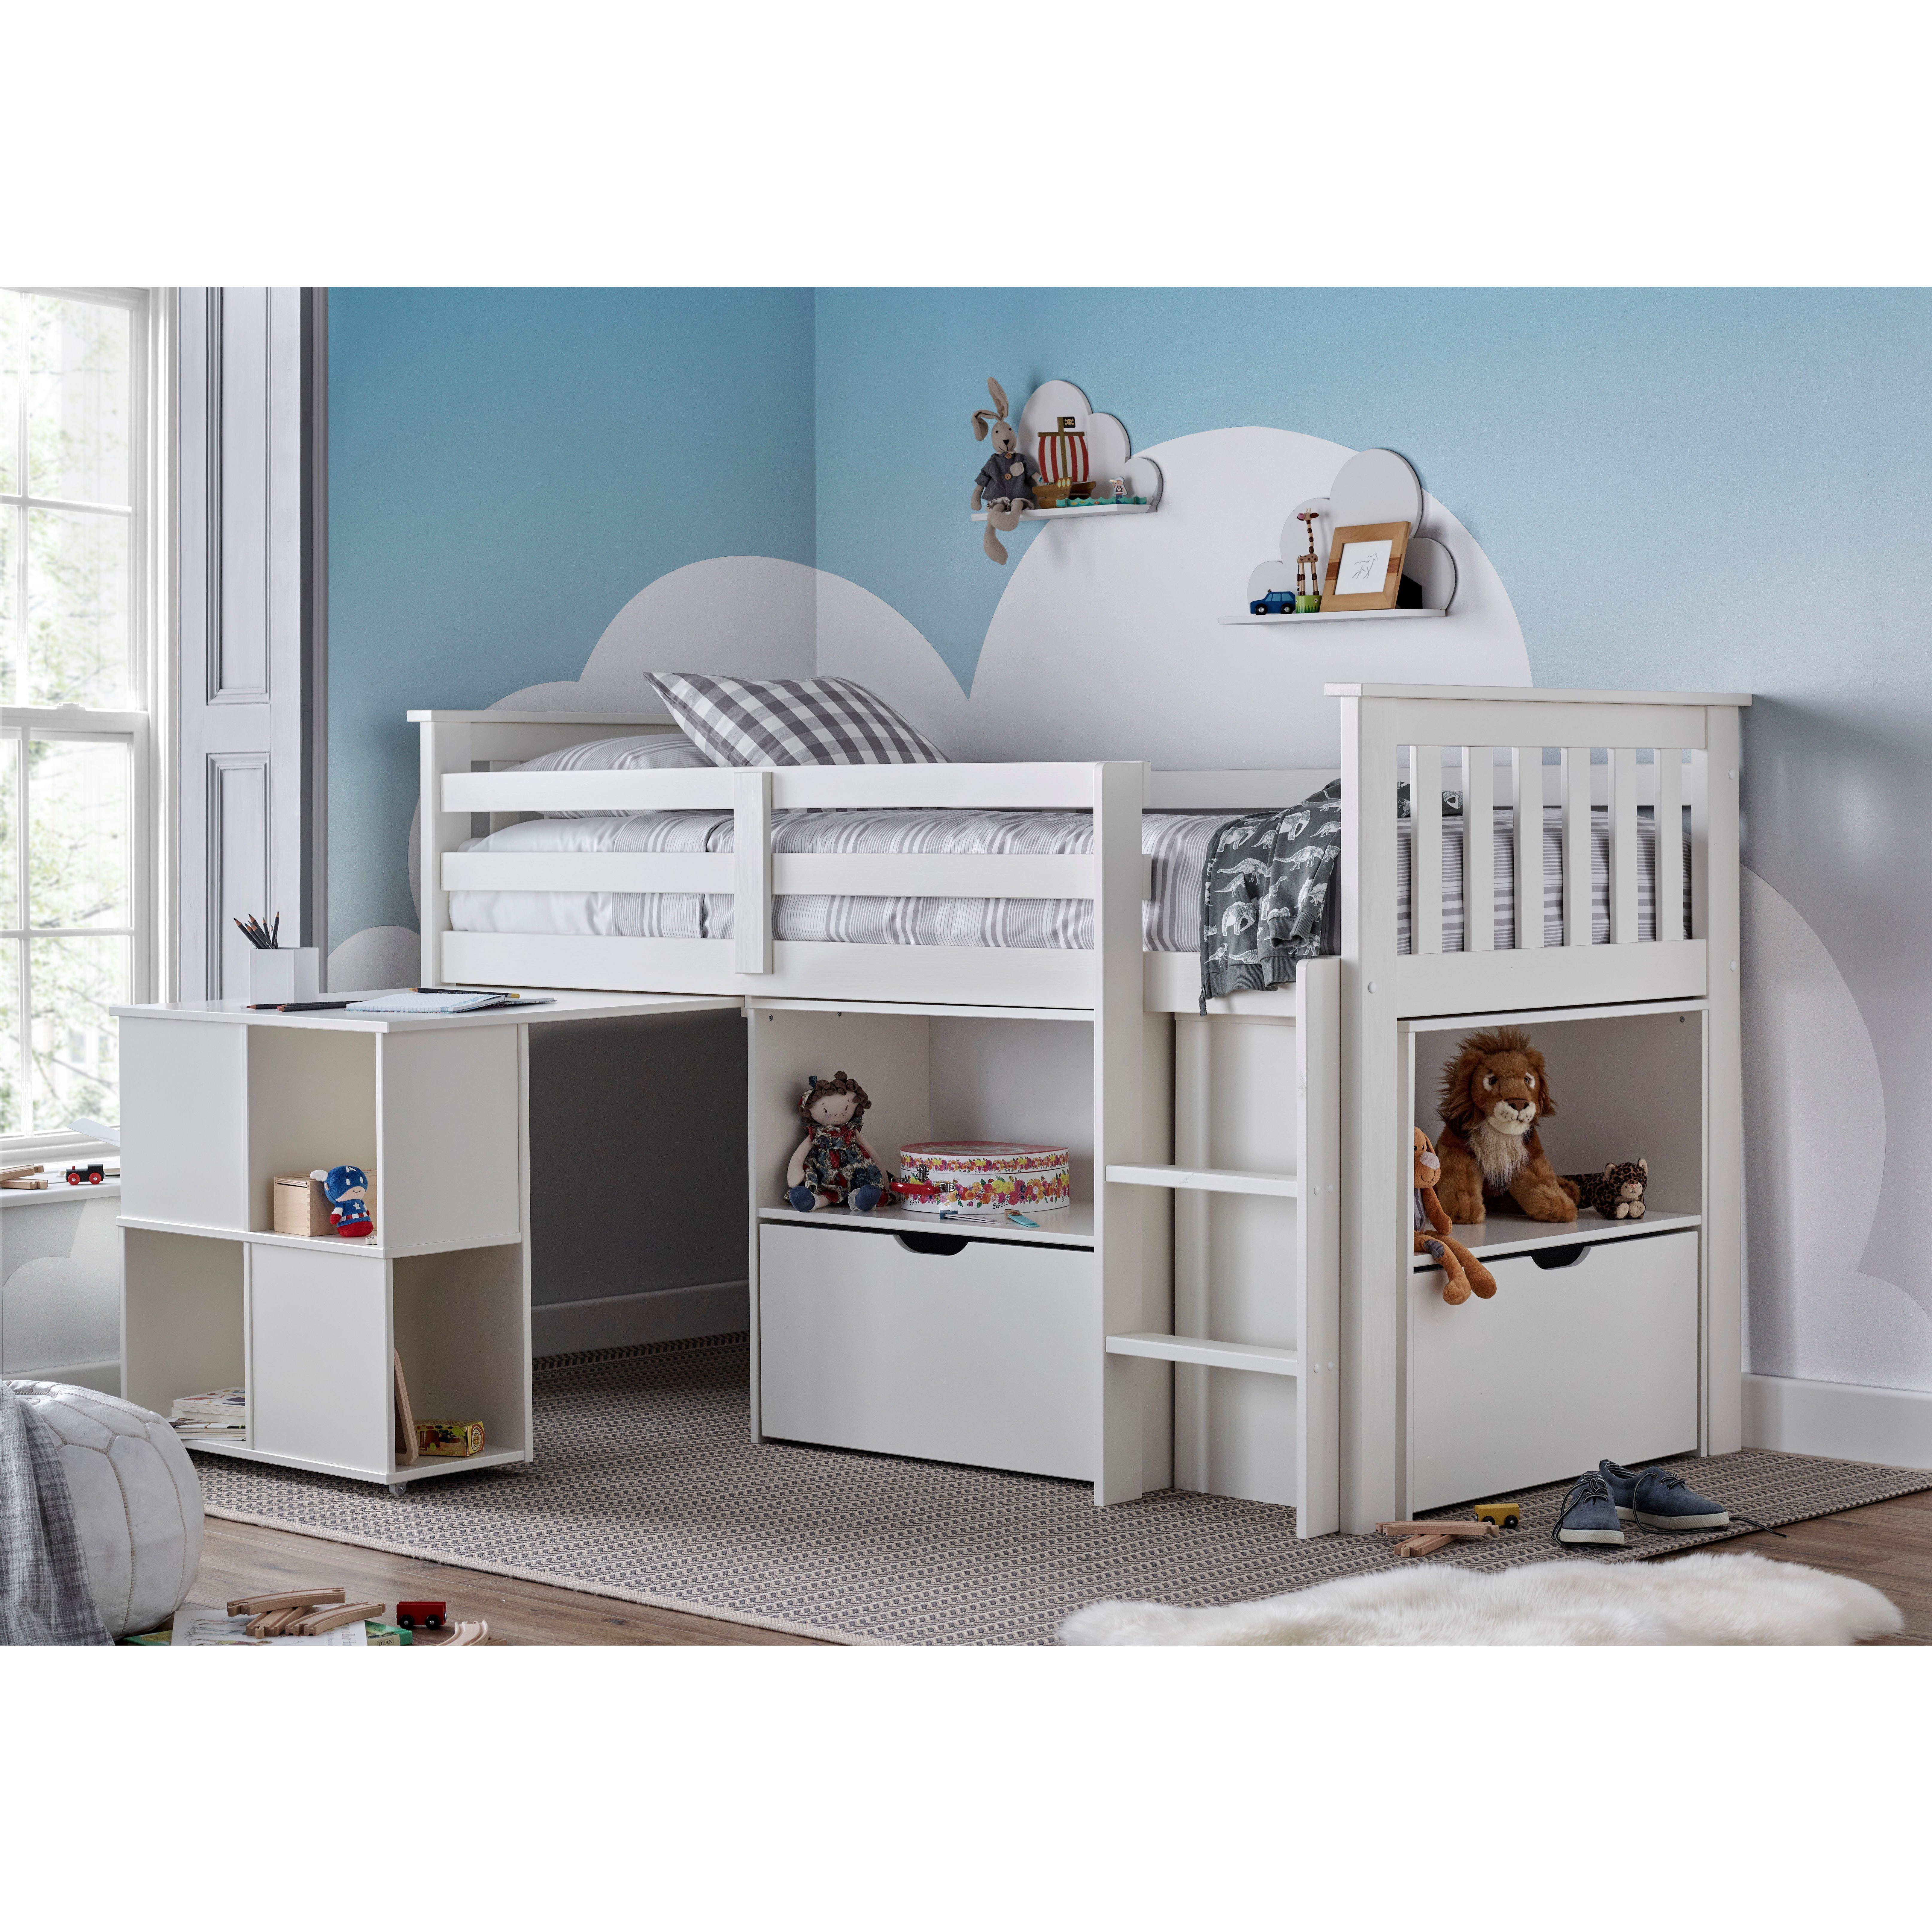 Milo Mid Sleeper Sleep Station Storage Bed With Desk And Spring Mattress - image 1